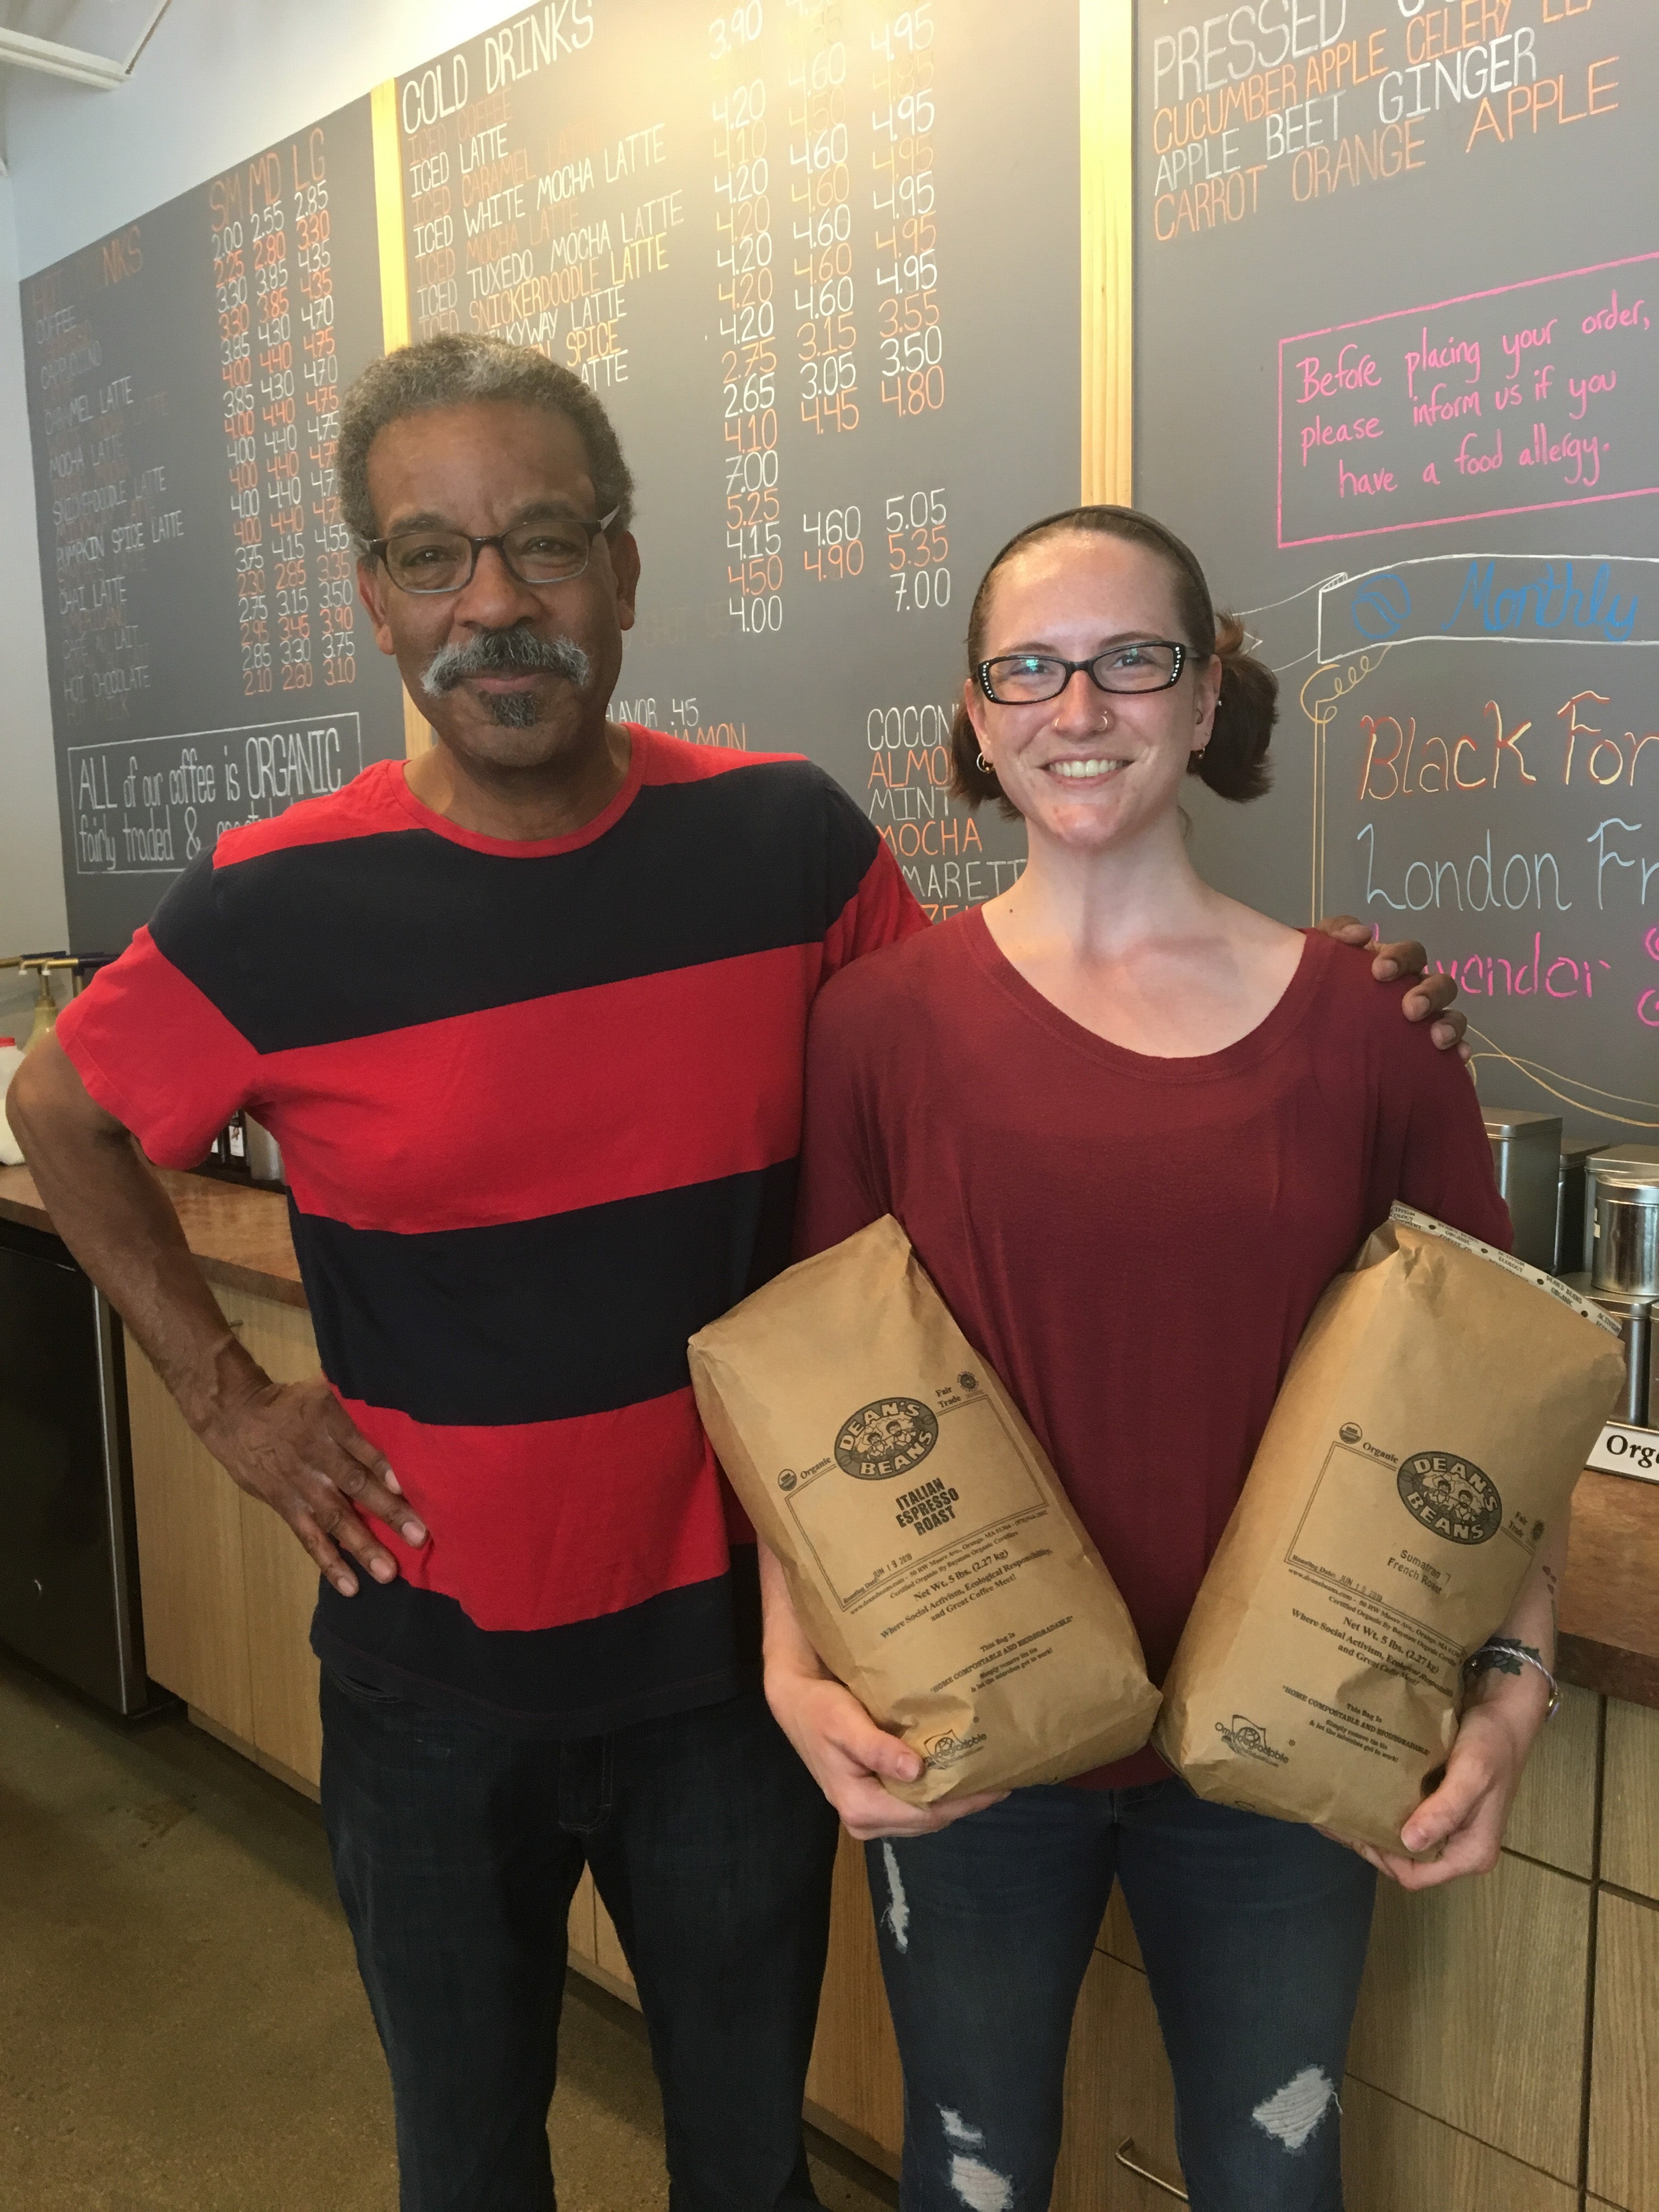 Owners of Acton Coffee House holding two bags of Dean's Beans coffee beans